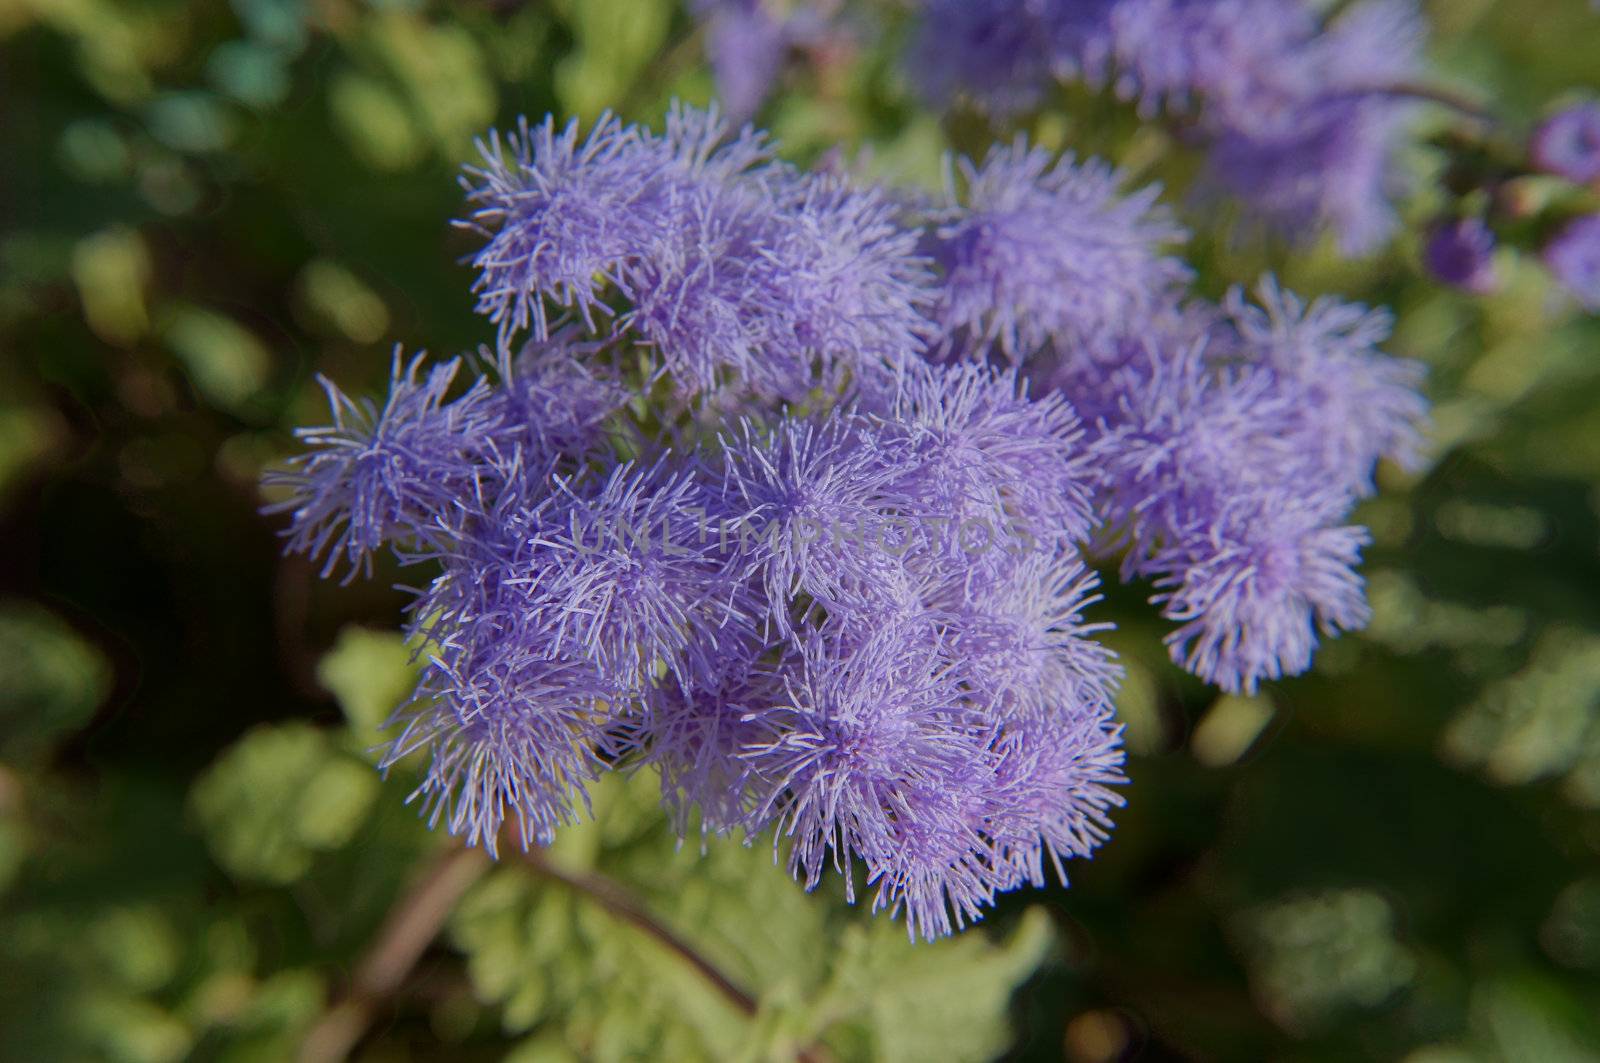 Ageratum by Elet